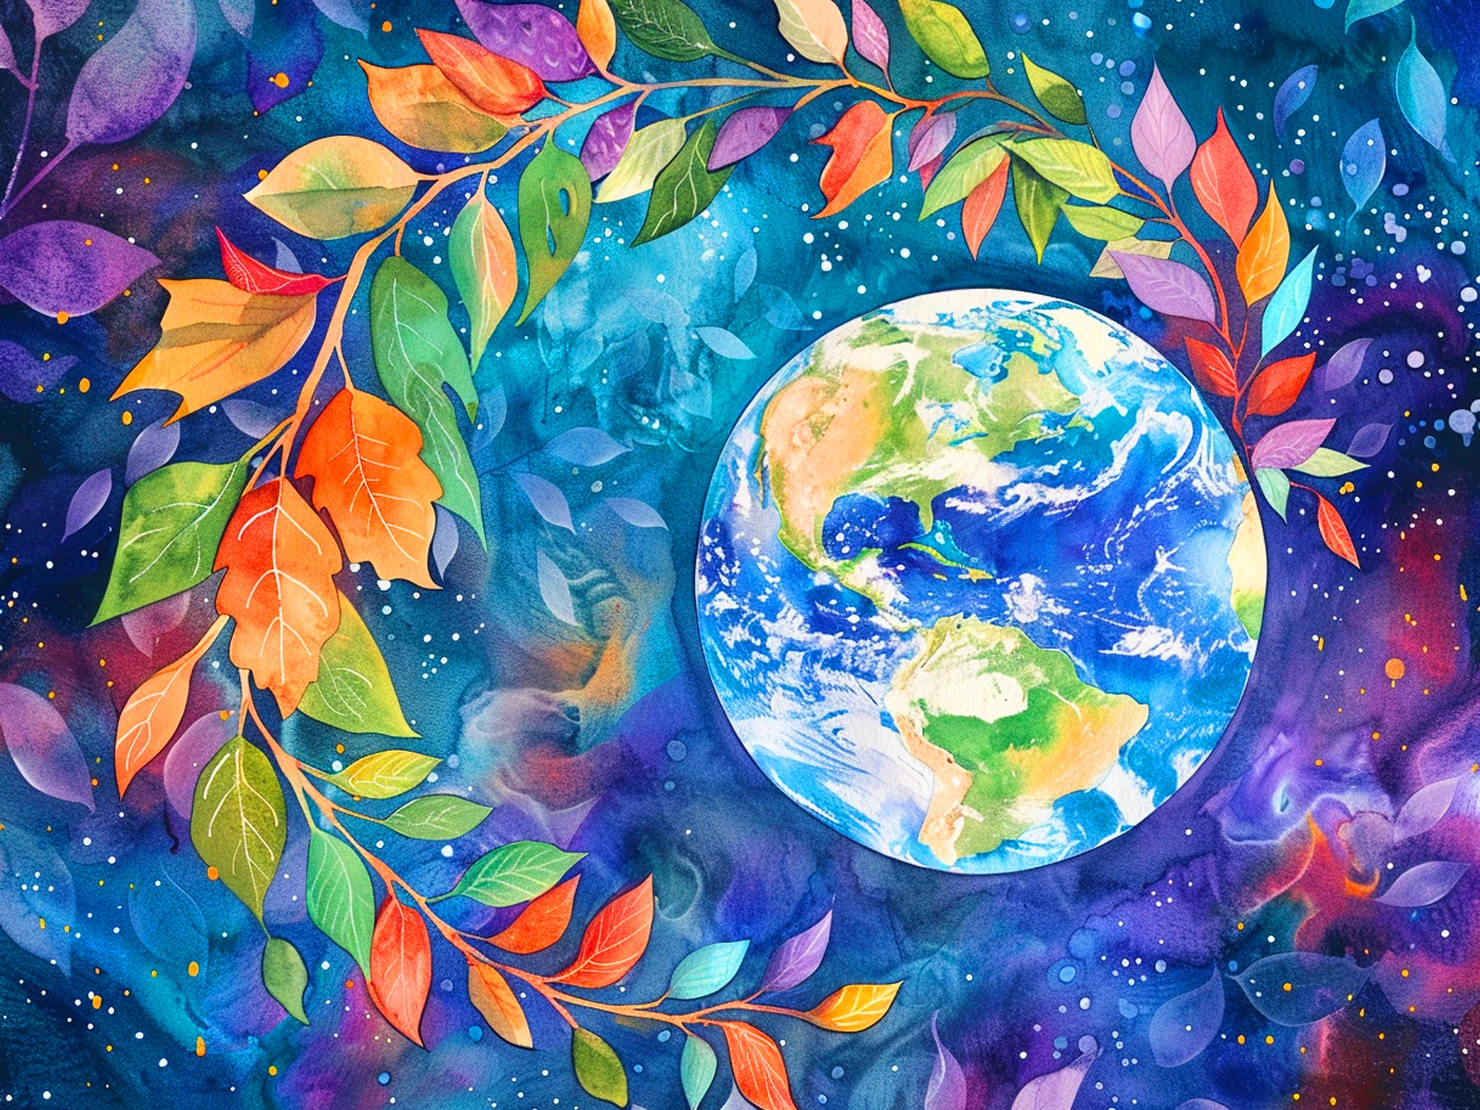 Abstract image of the earth with leaves swirling around it in space